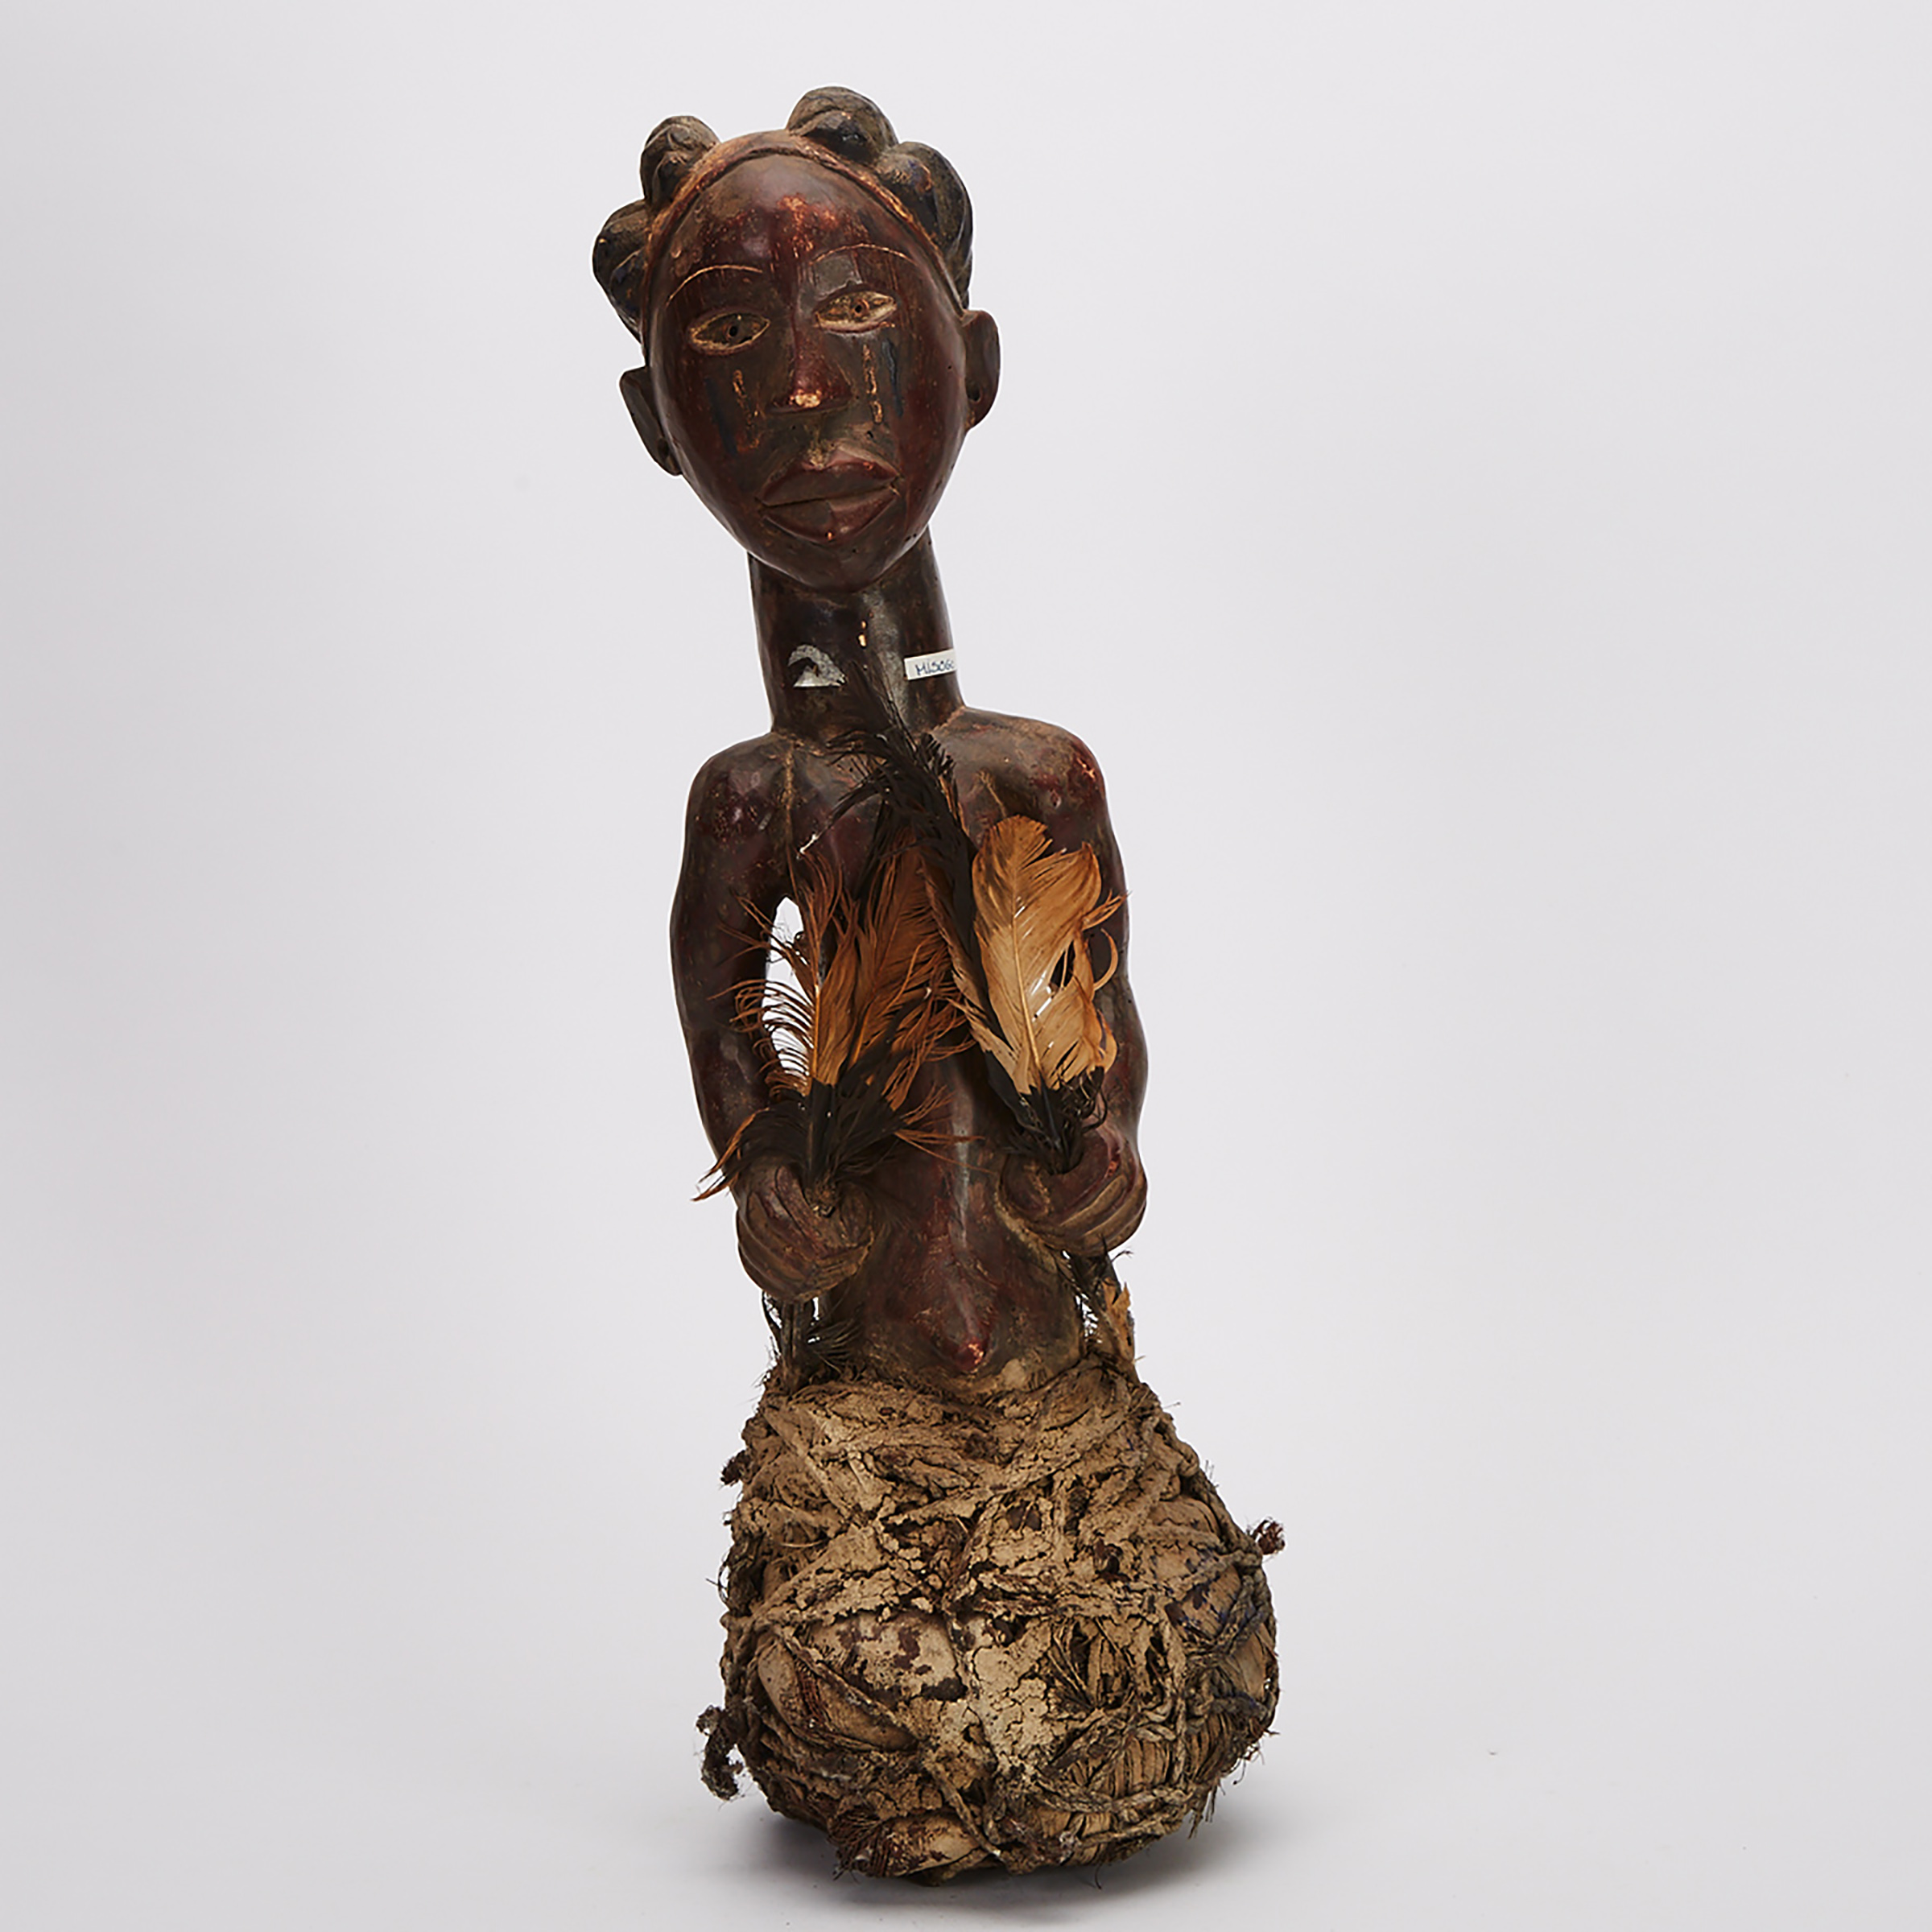 Figural Reliquary Bundle, possibly Baga, West Africa